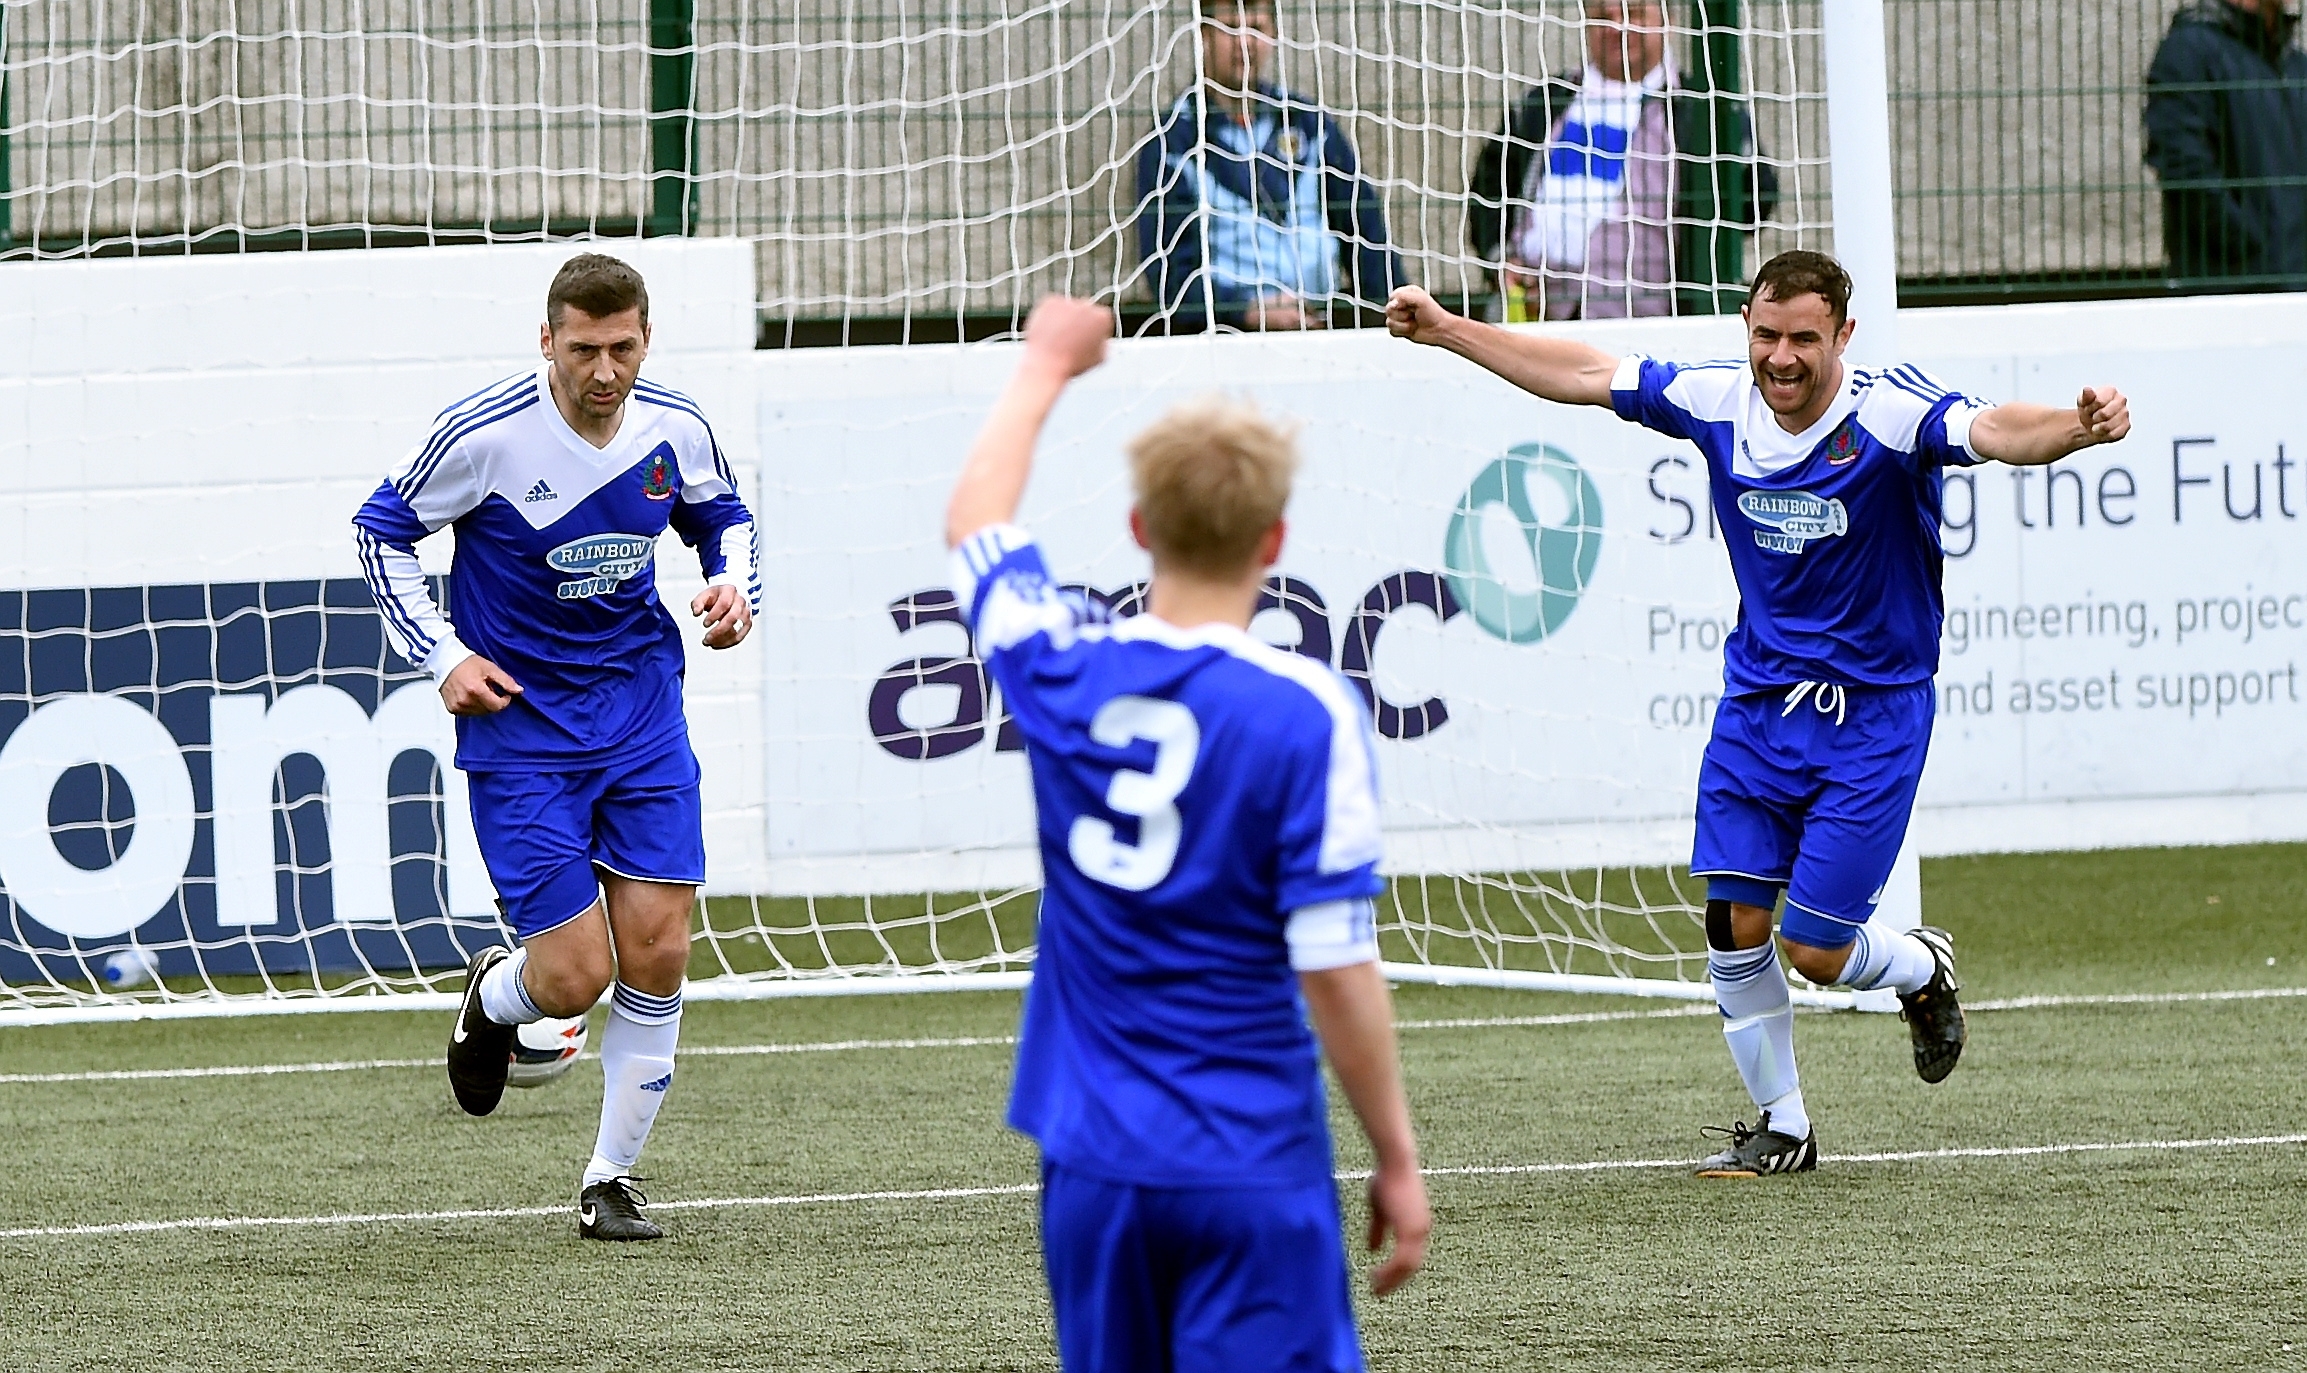 Cove scorer Roy McBain and team mate Jamie Watt celebrate after scoring against Banks o' Dee. Picture by Kevin Emslie